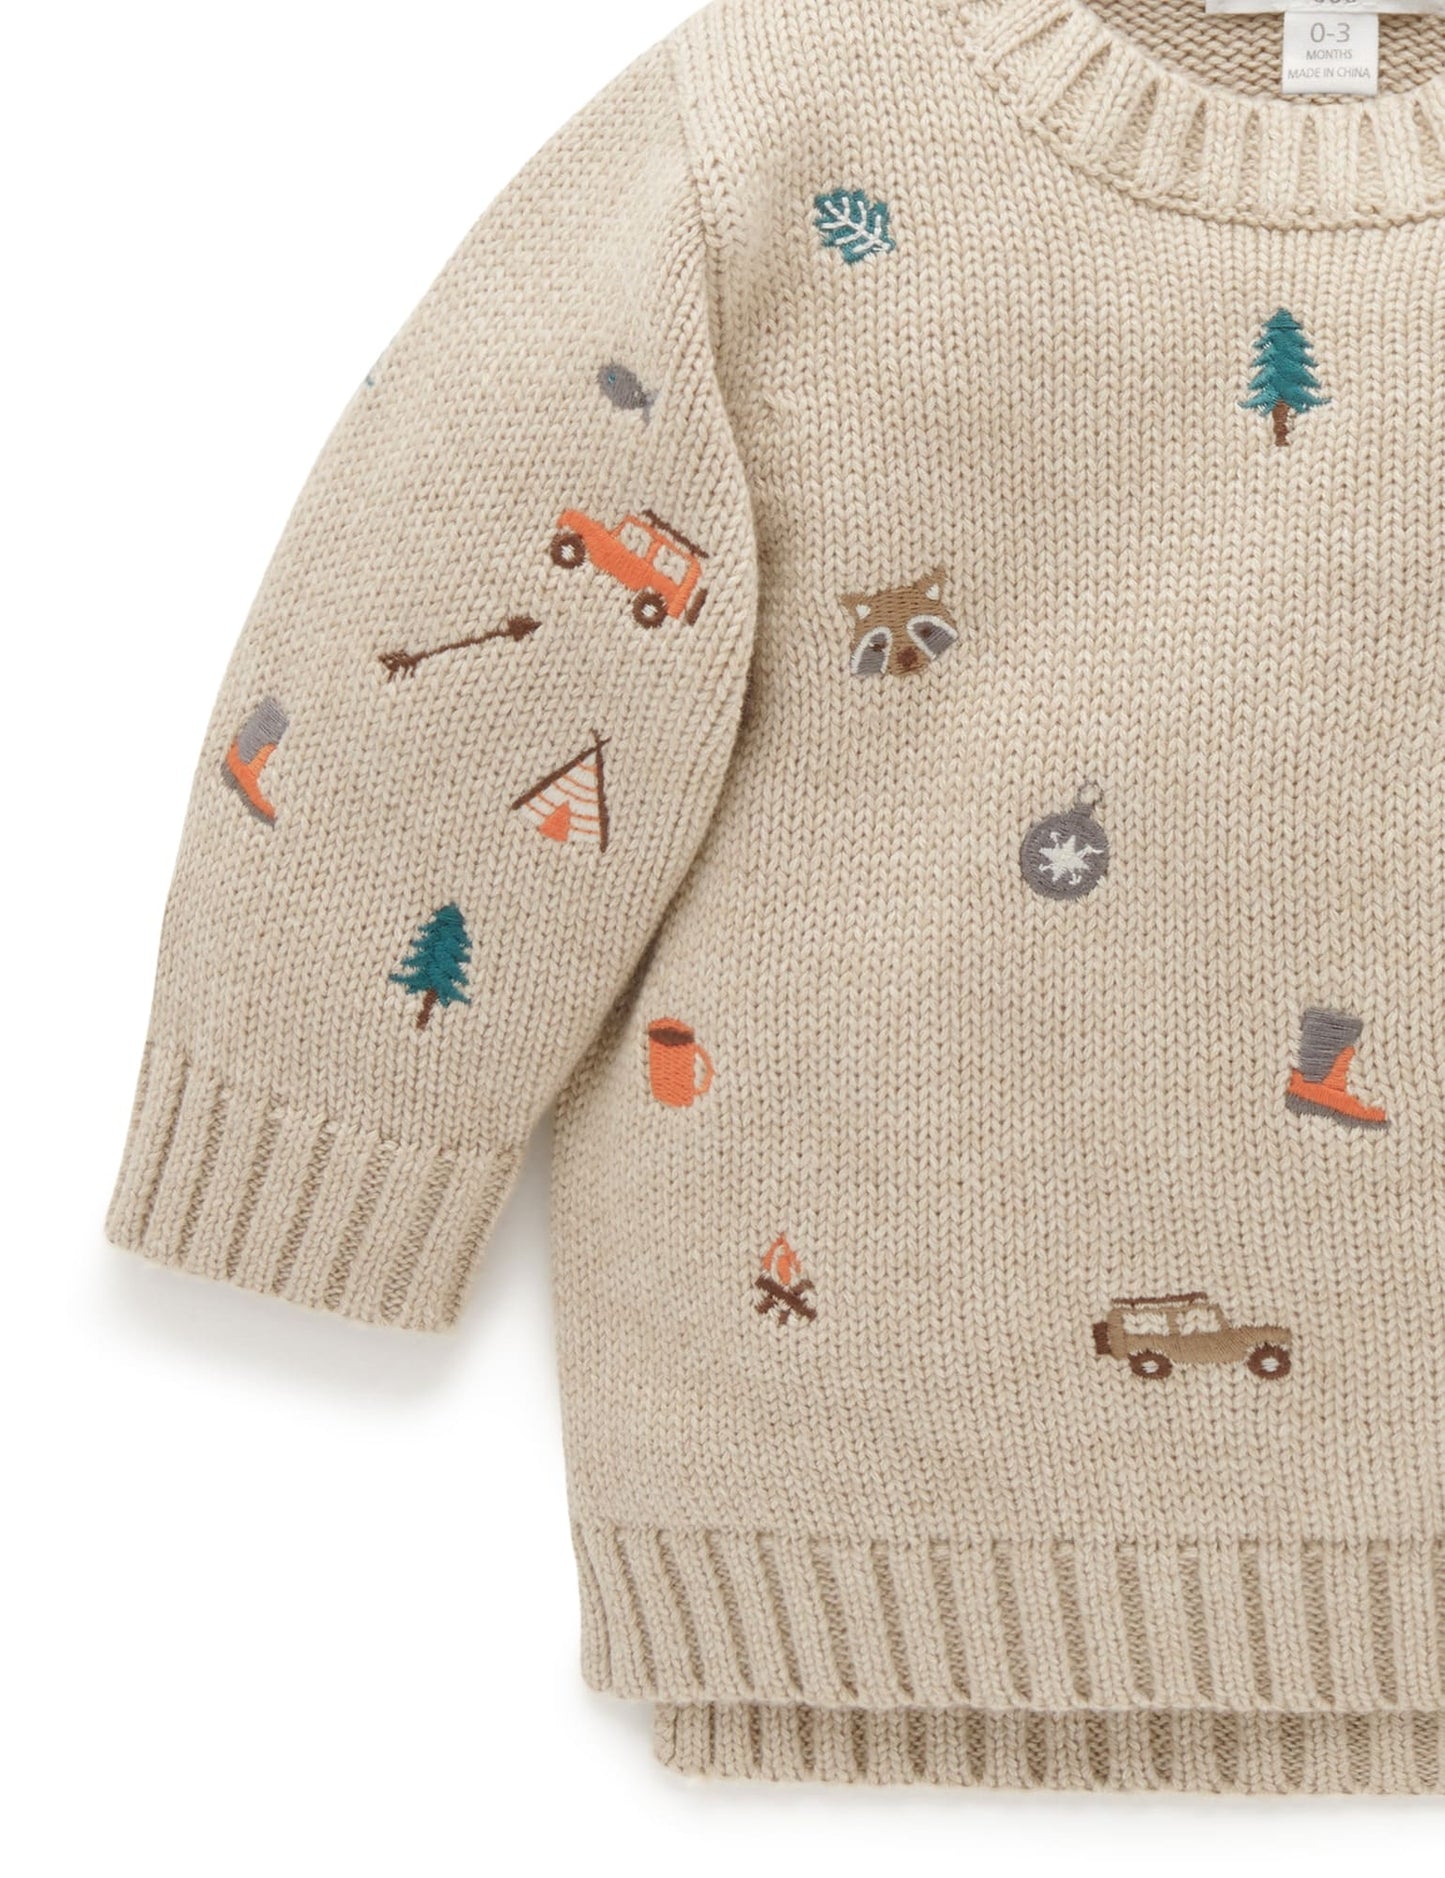 Purebaby Purebaby Forest Embroidered Jumper PD1002W22